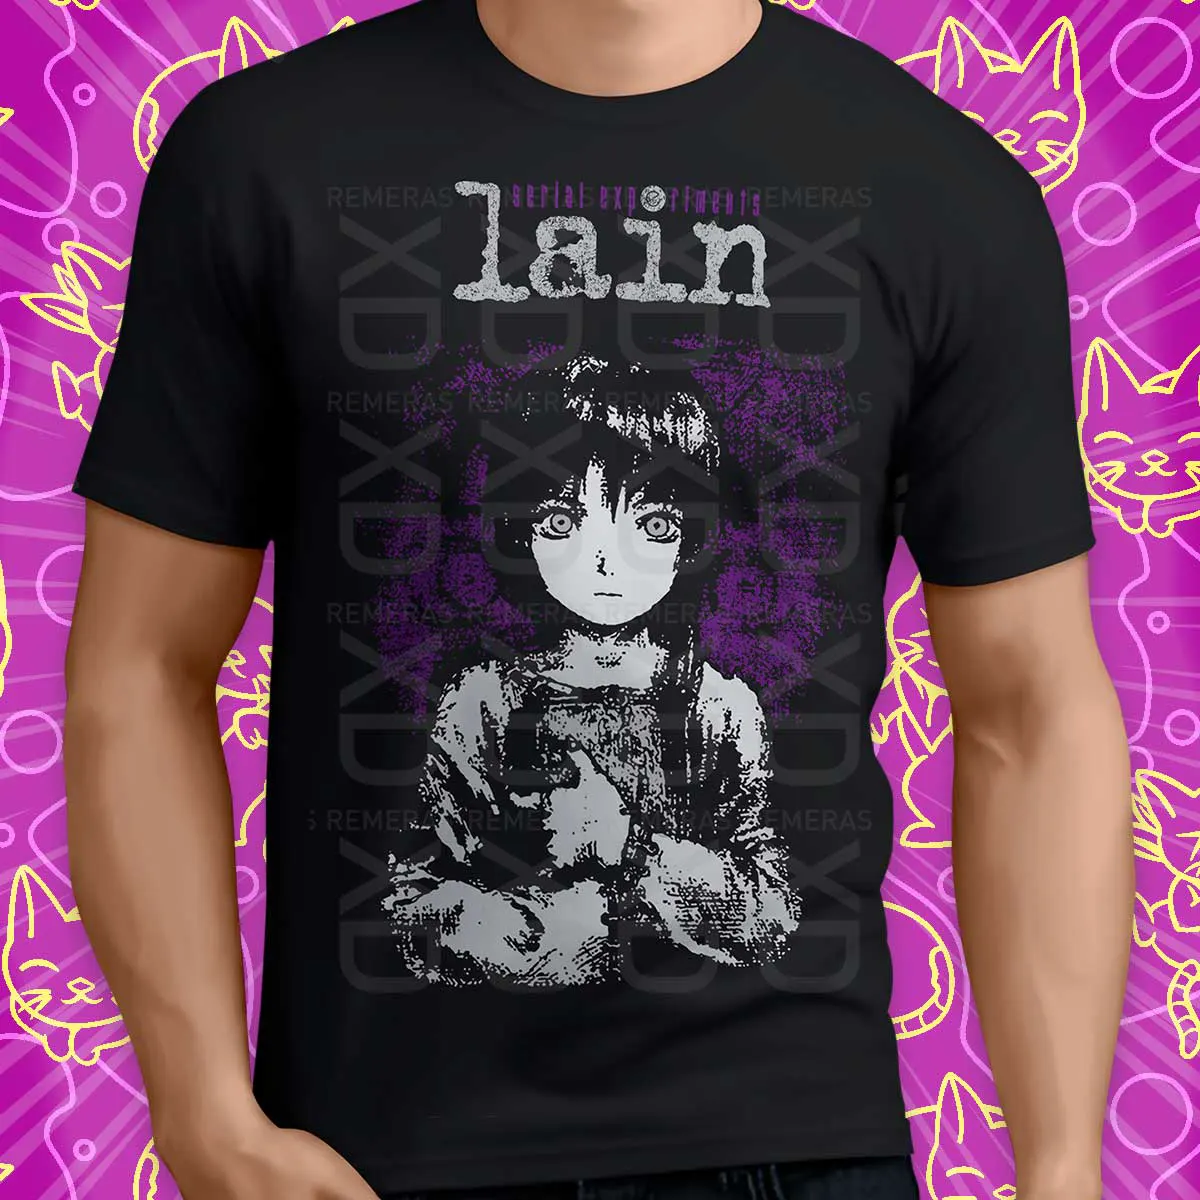 Remera Serial Experiments Lain